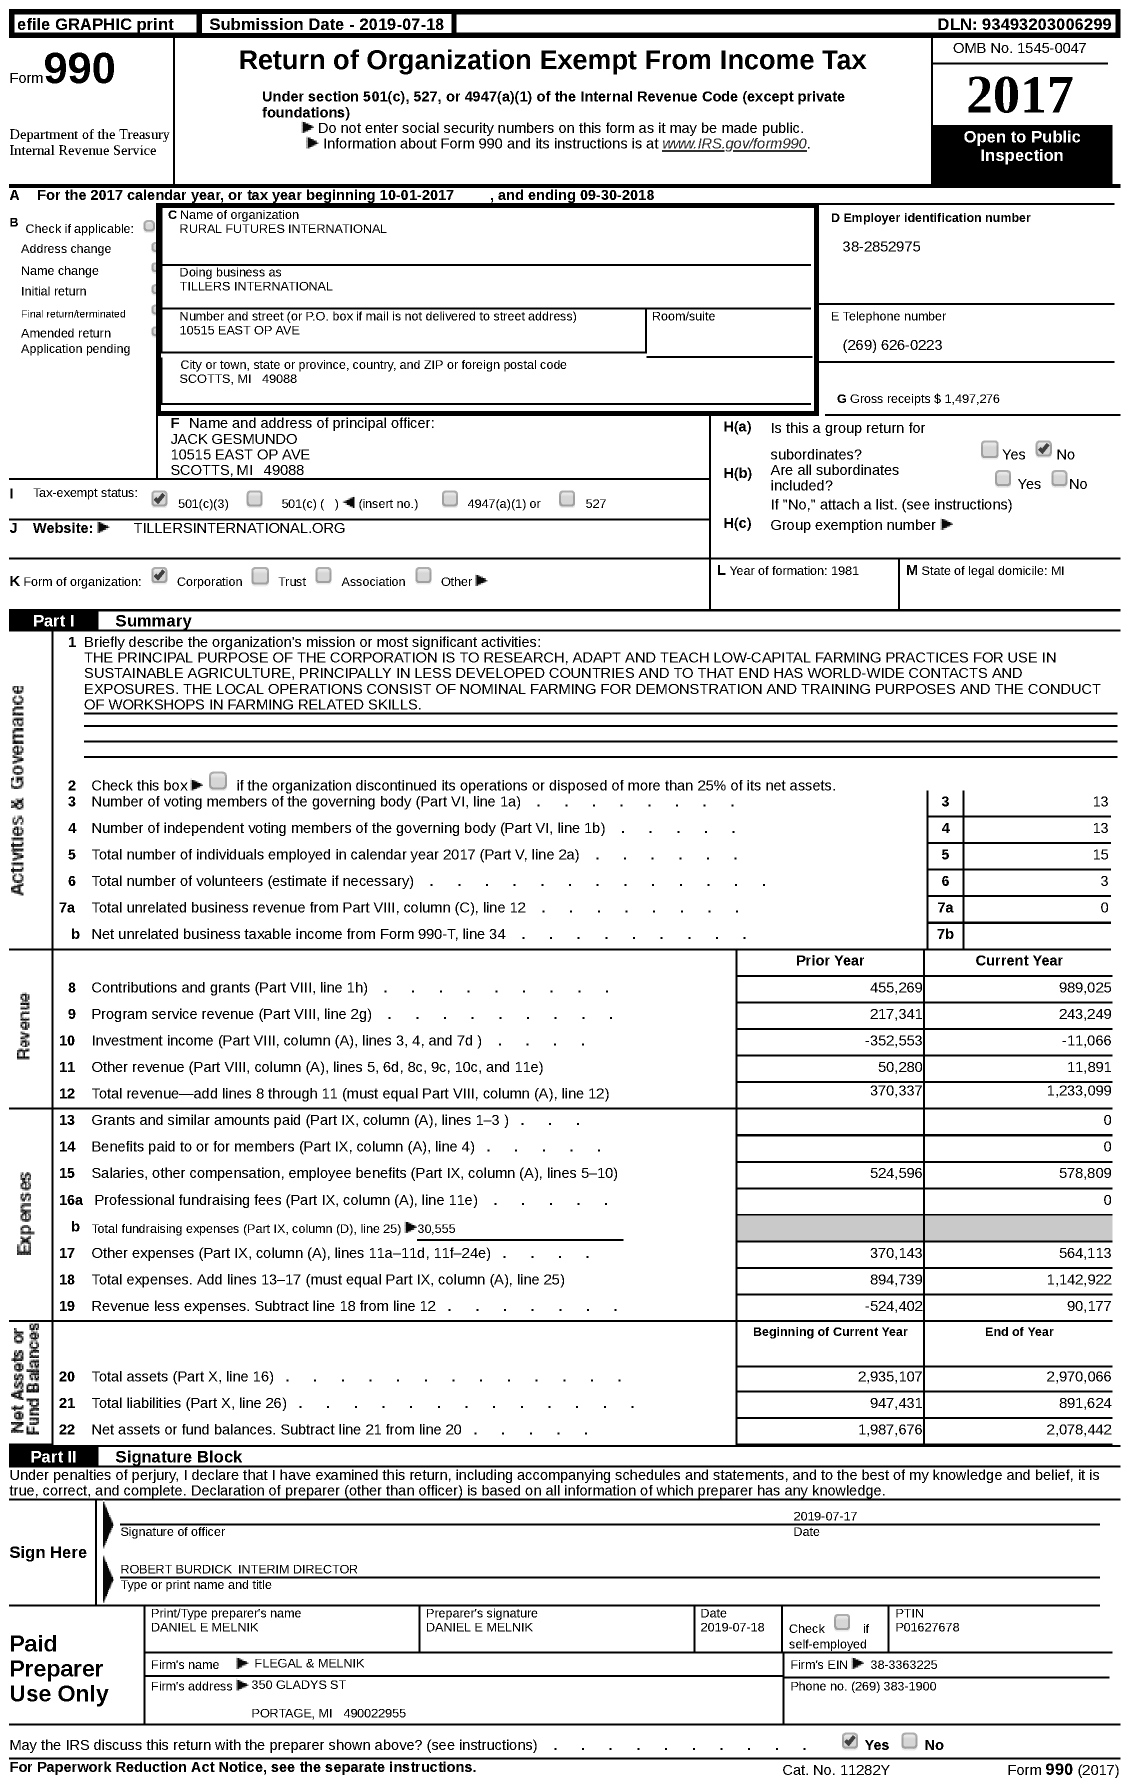 Image of first page of 2017 Form 990 for Tillers International